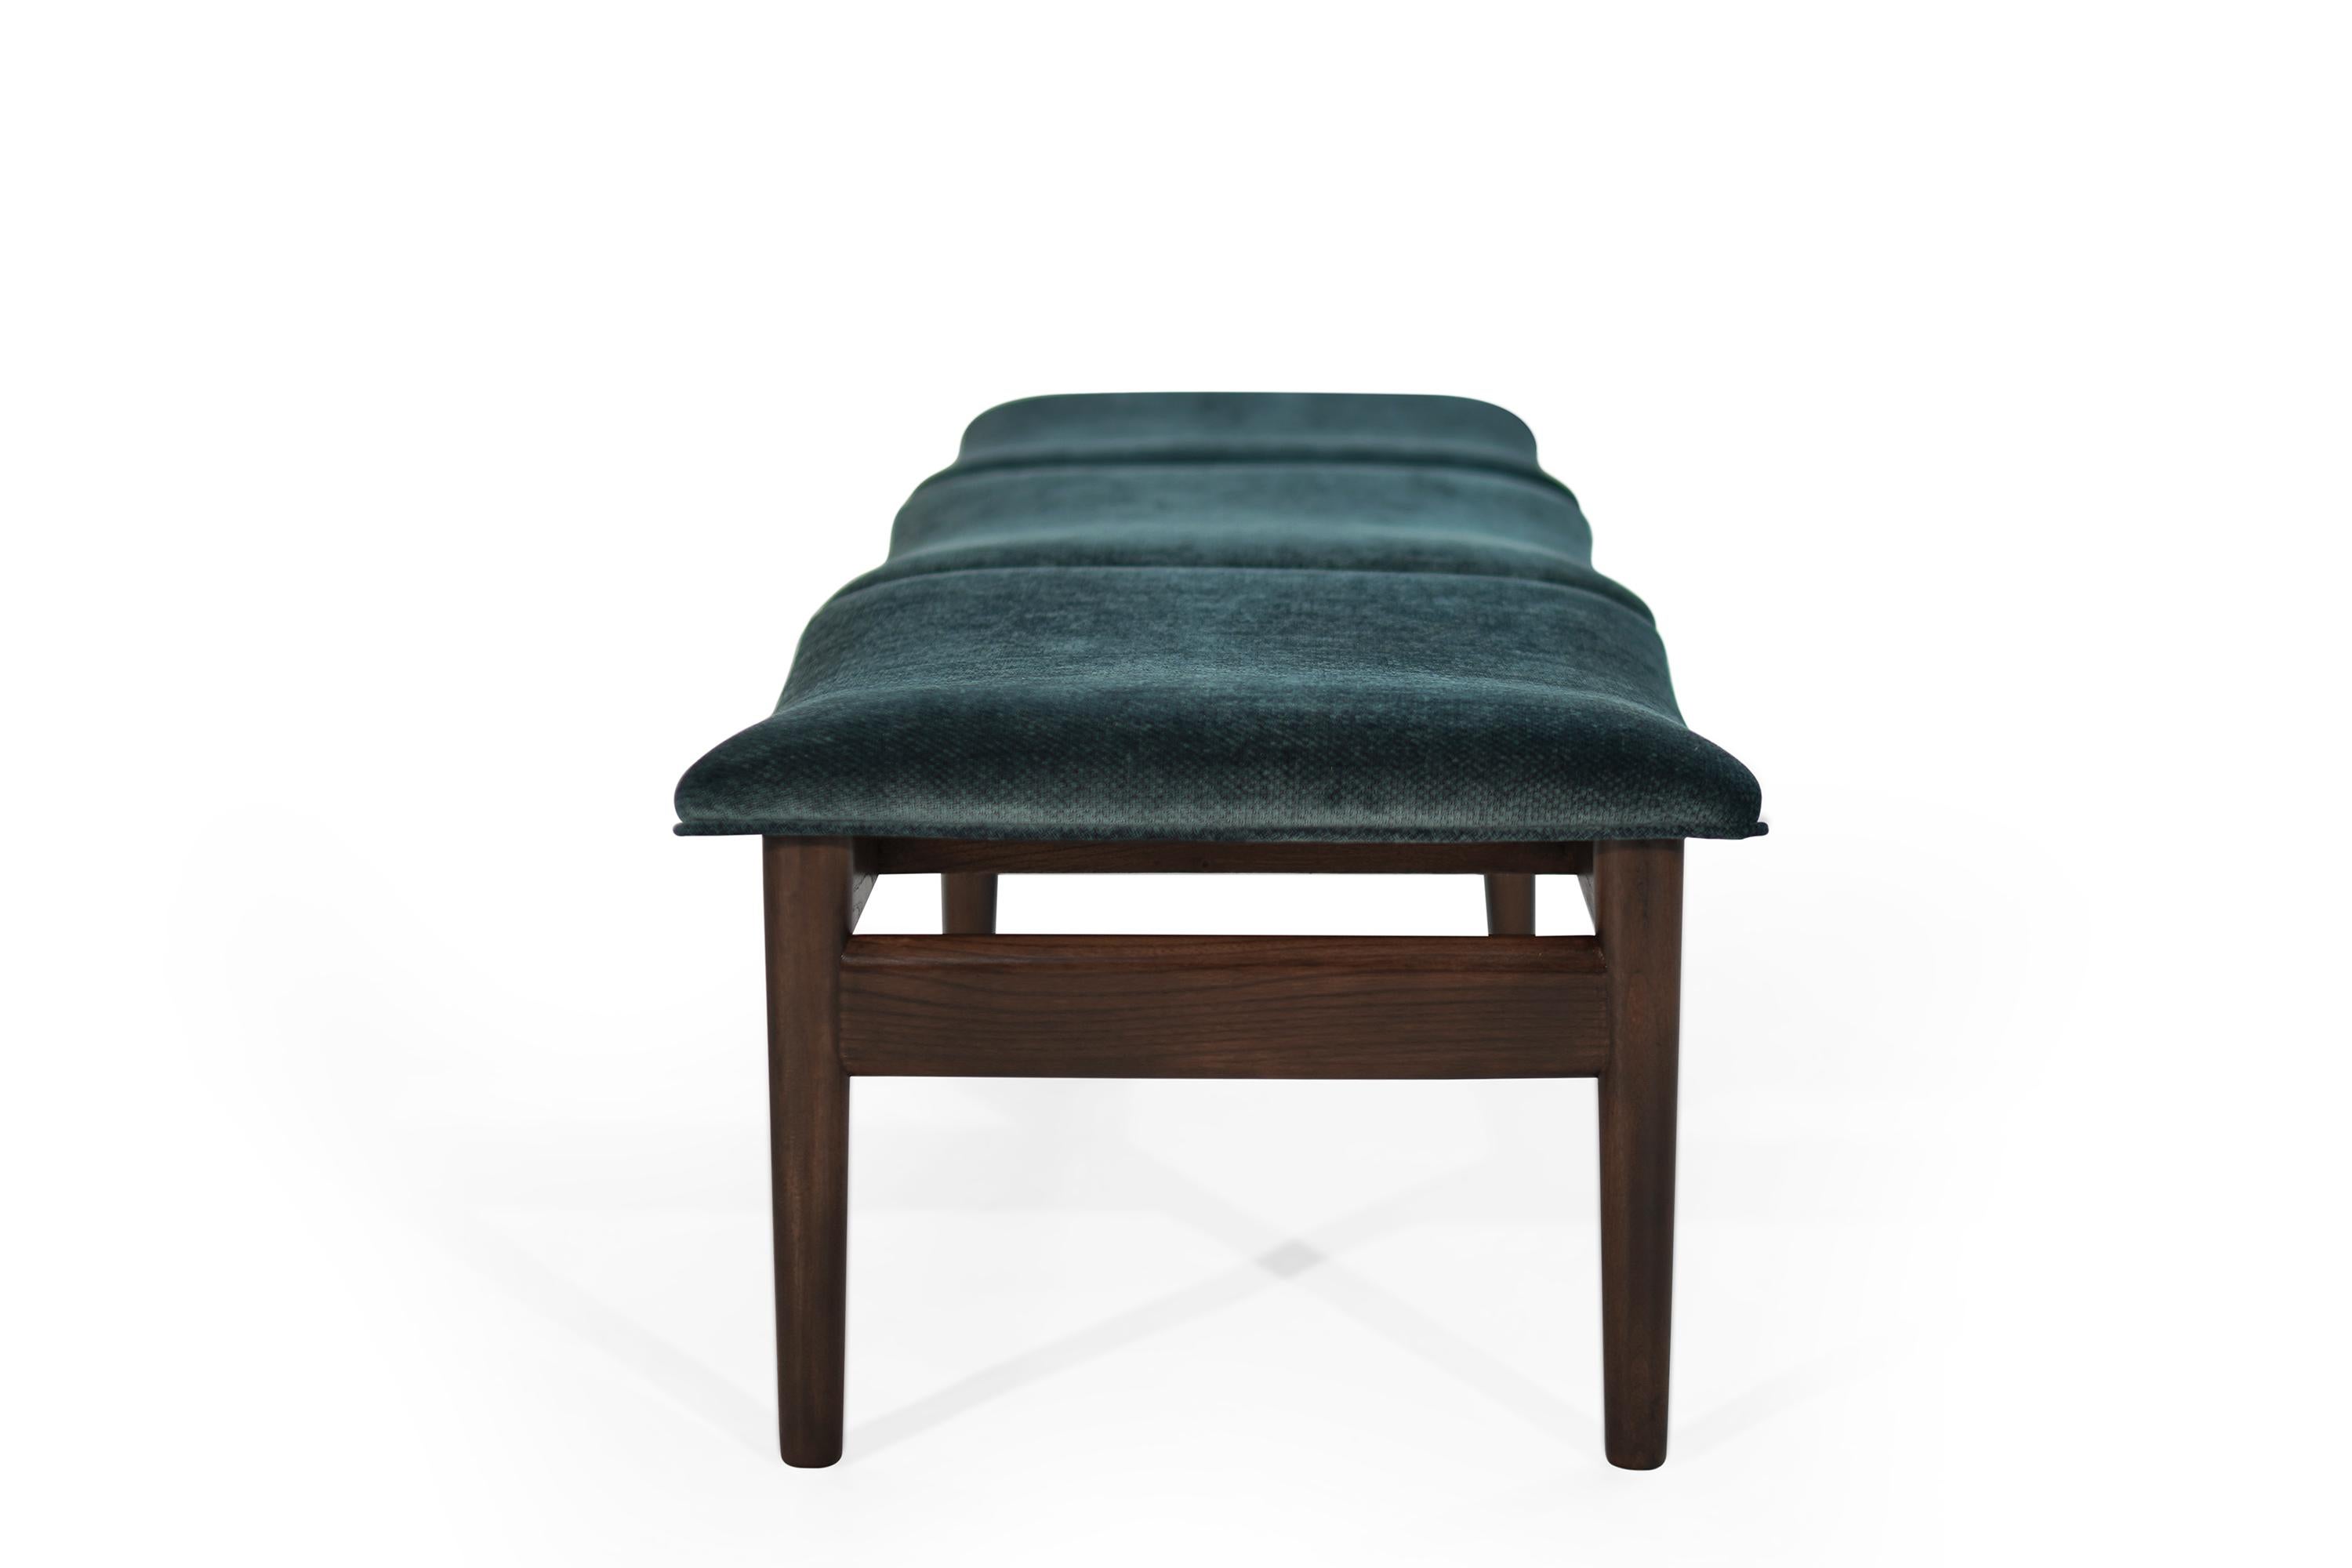 20th Century Lawrence Peabody Bench in Teal Twill, 1950s